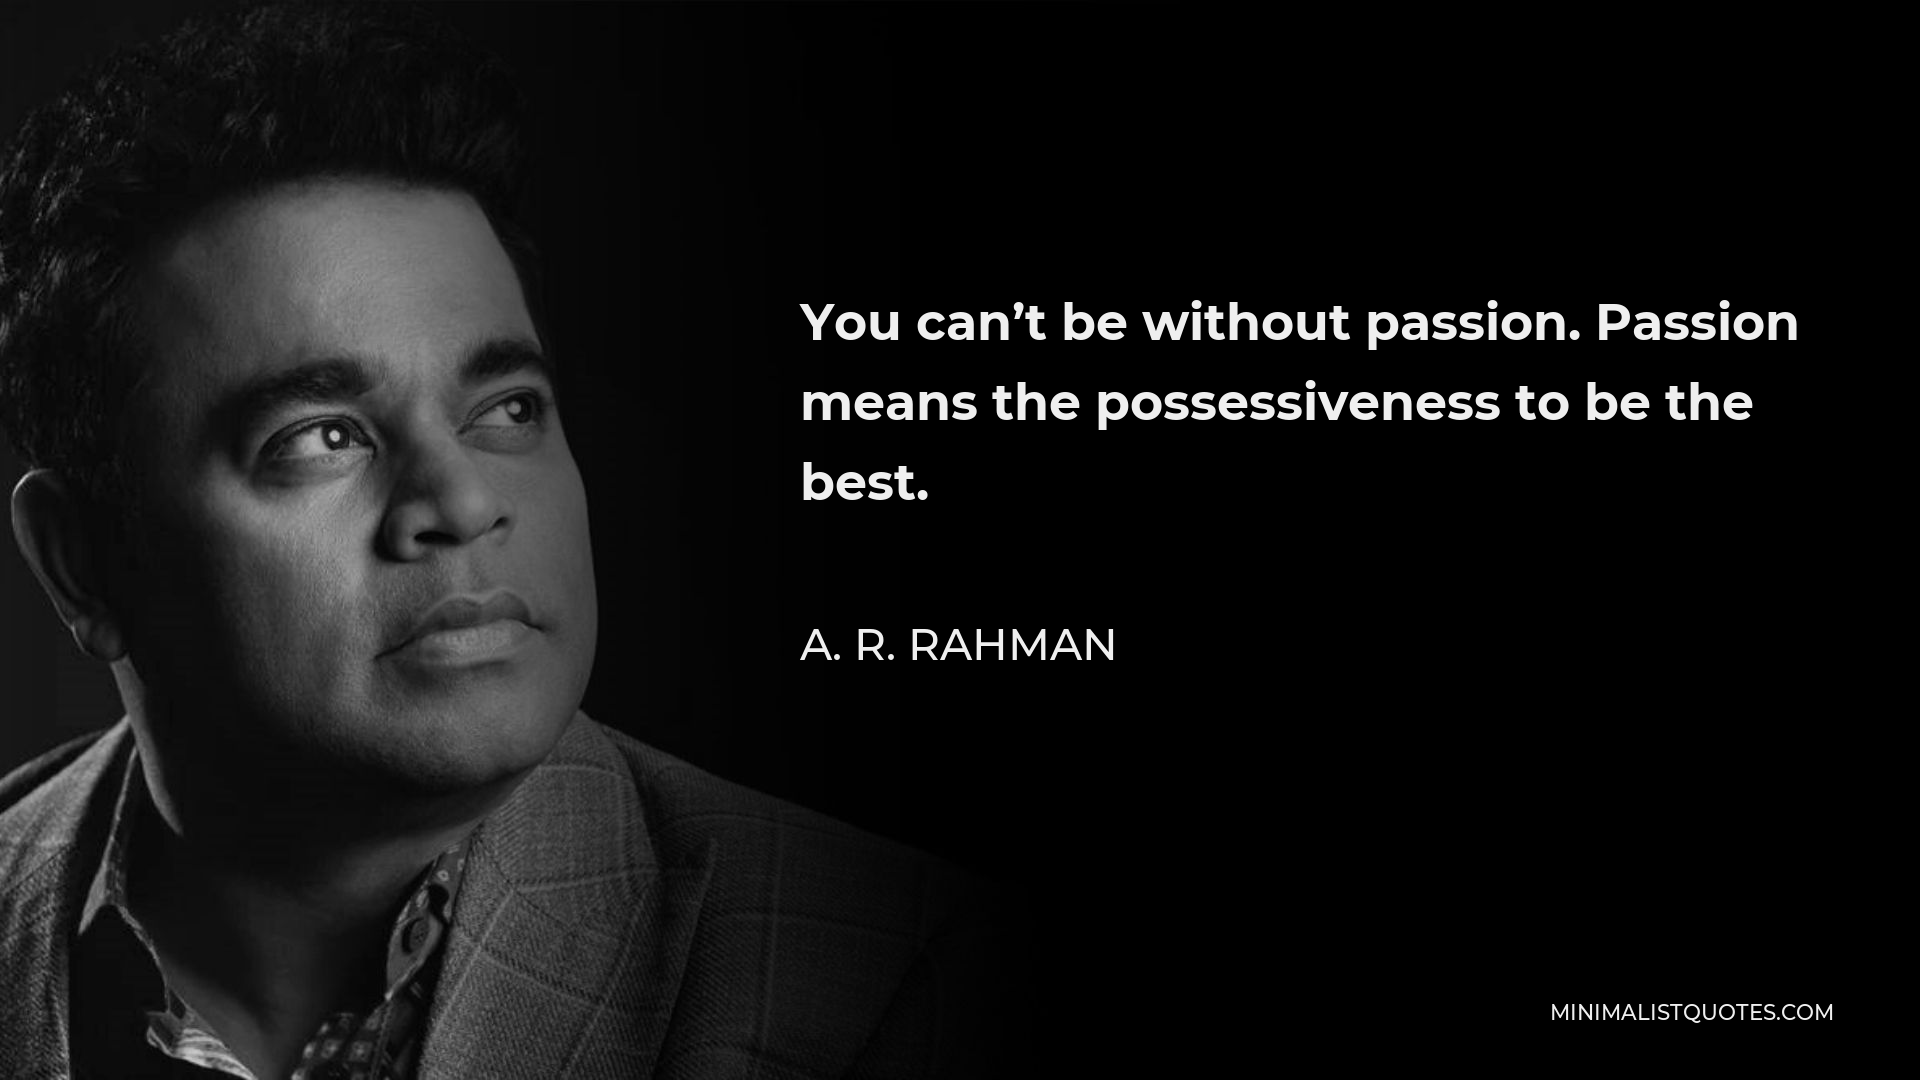 A. R. Rahman Quote - You can’t be without passion. Passion means the possessiveness to be the best.